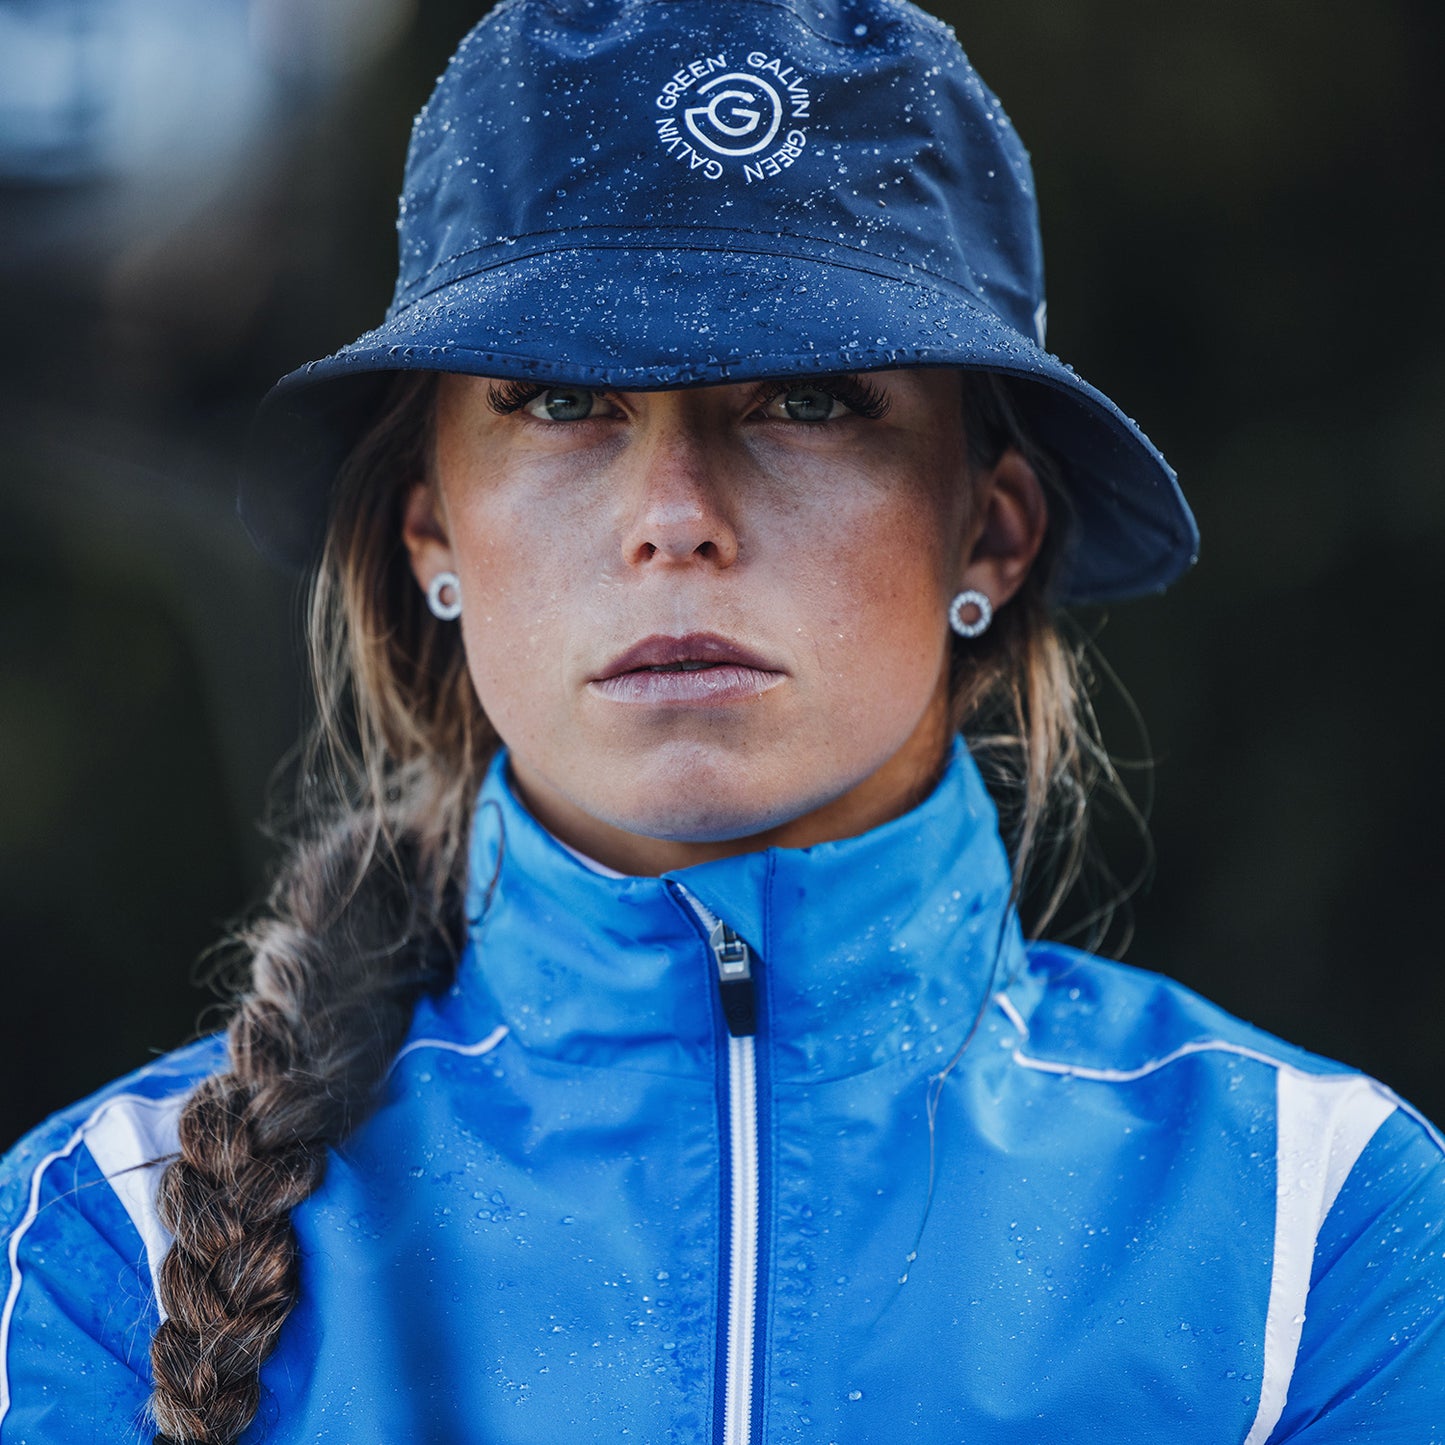 Galvin Green Ladies GORE-TEX Paclite Jacket with Contrast Panels in Blue/Cool Grey/White